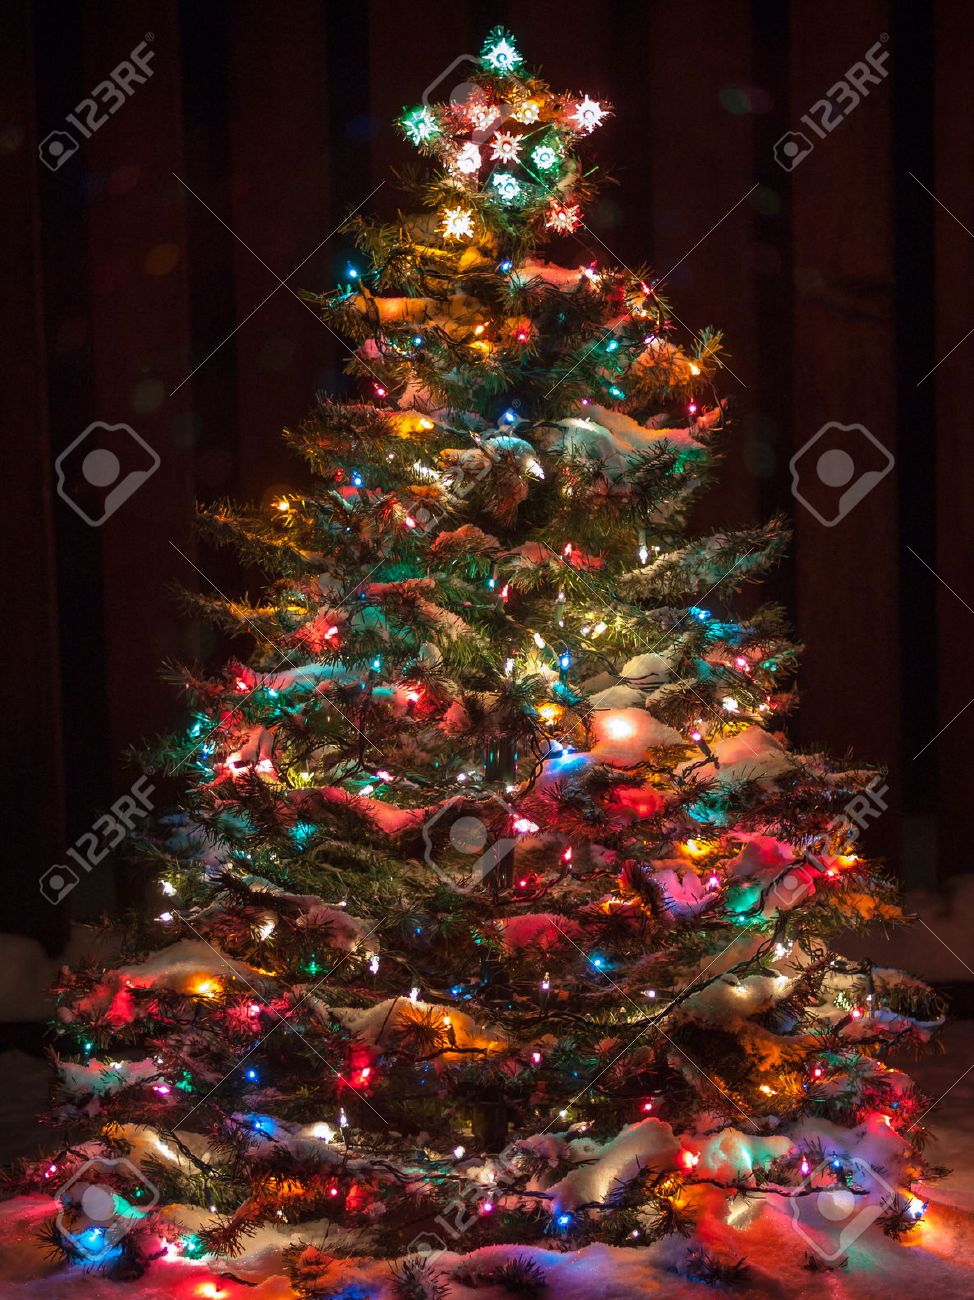 10 Elegant Christmas Tree Decorating Ideas With Multi Colored Lights snow covered christmas tree with multi colored lights stock photo 2024